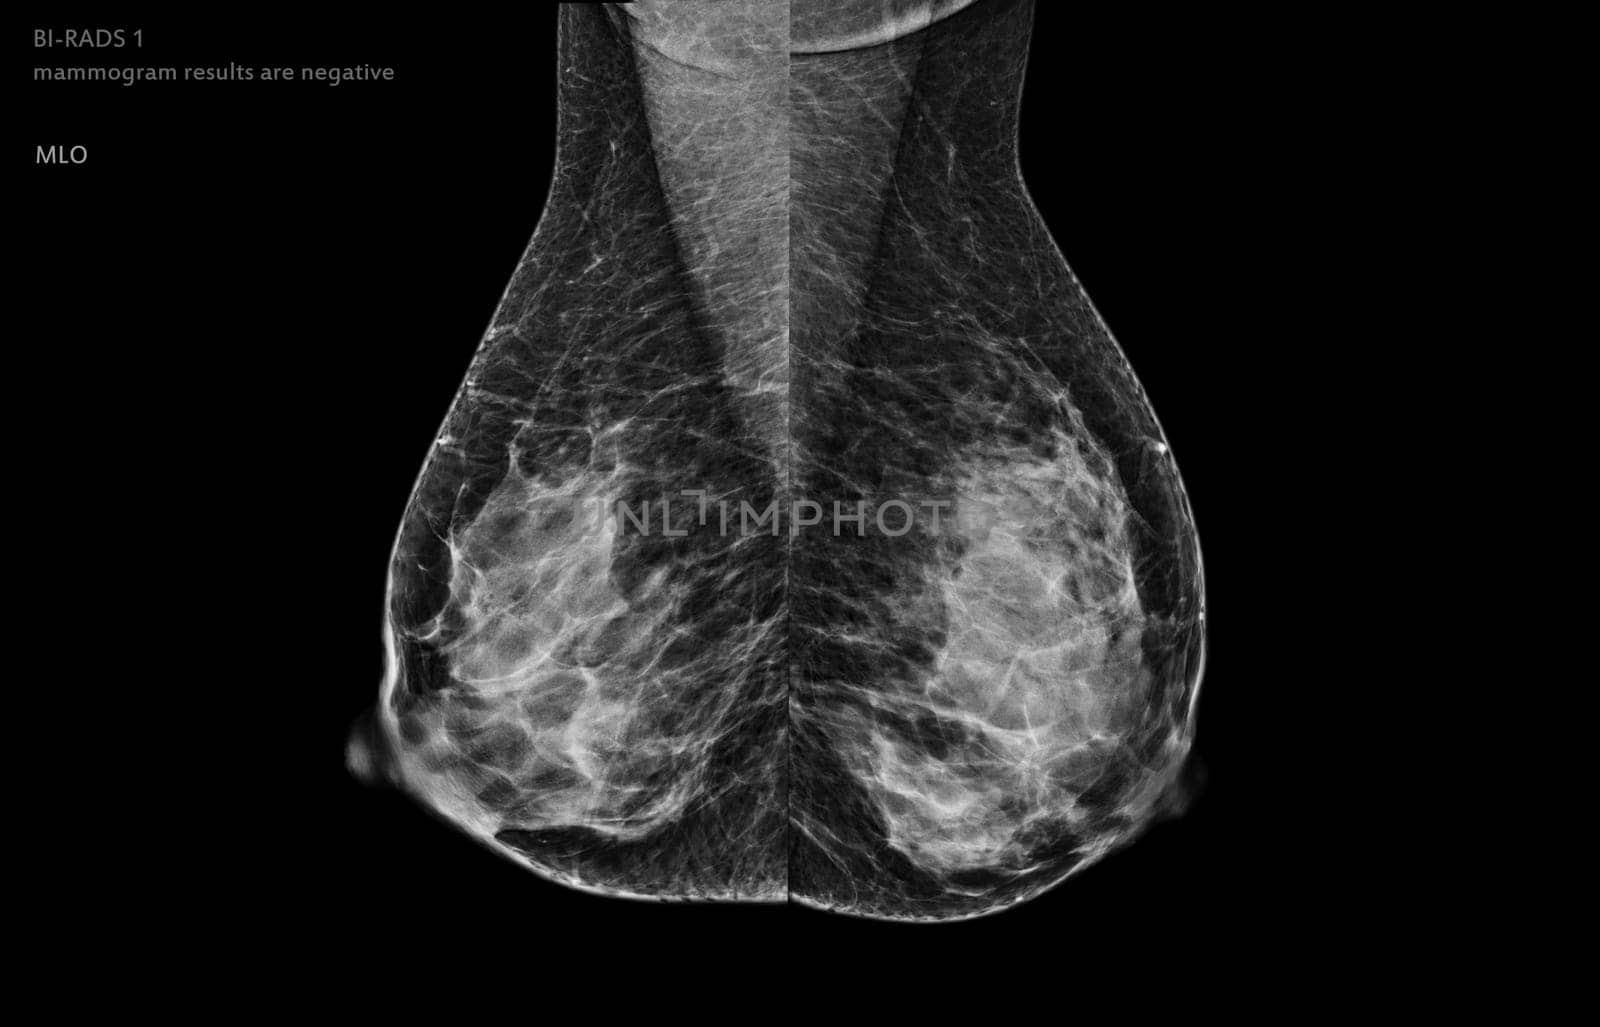  X-ray Digital Mammogram of both  side MLO view . mammography or breast scan for Breast cancer BI-RADS 1 mammogram results are negative.